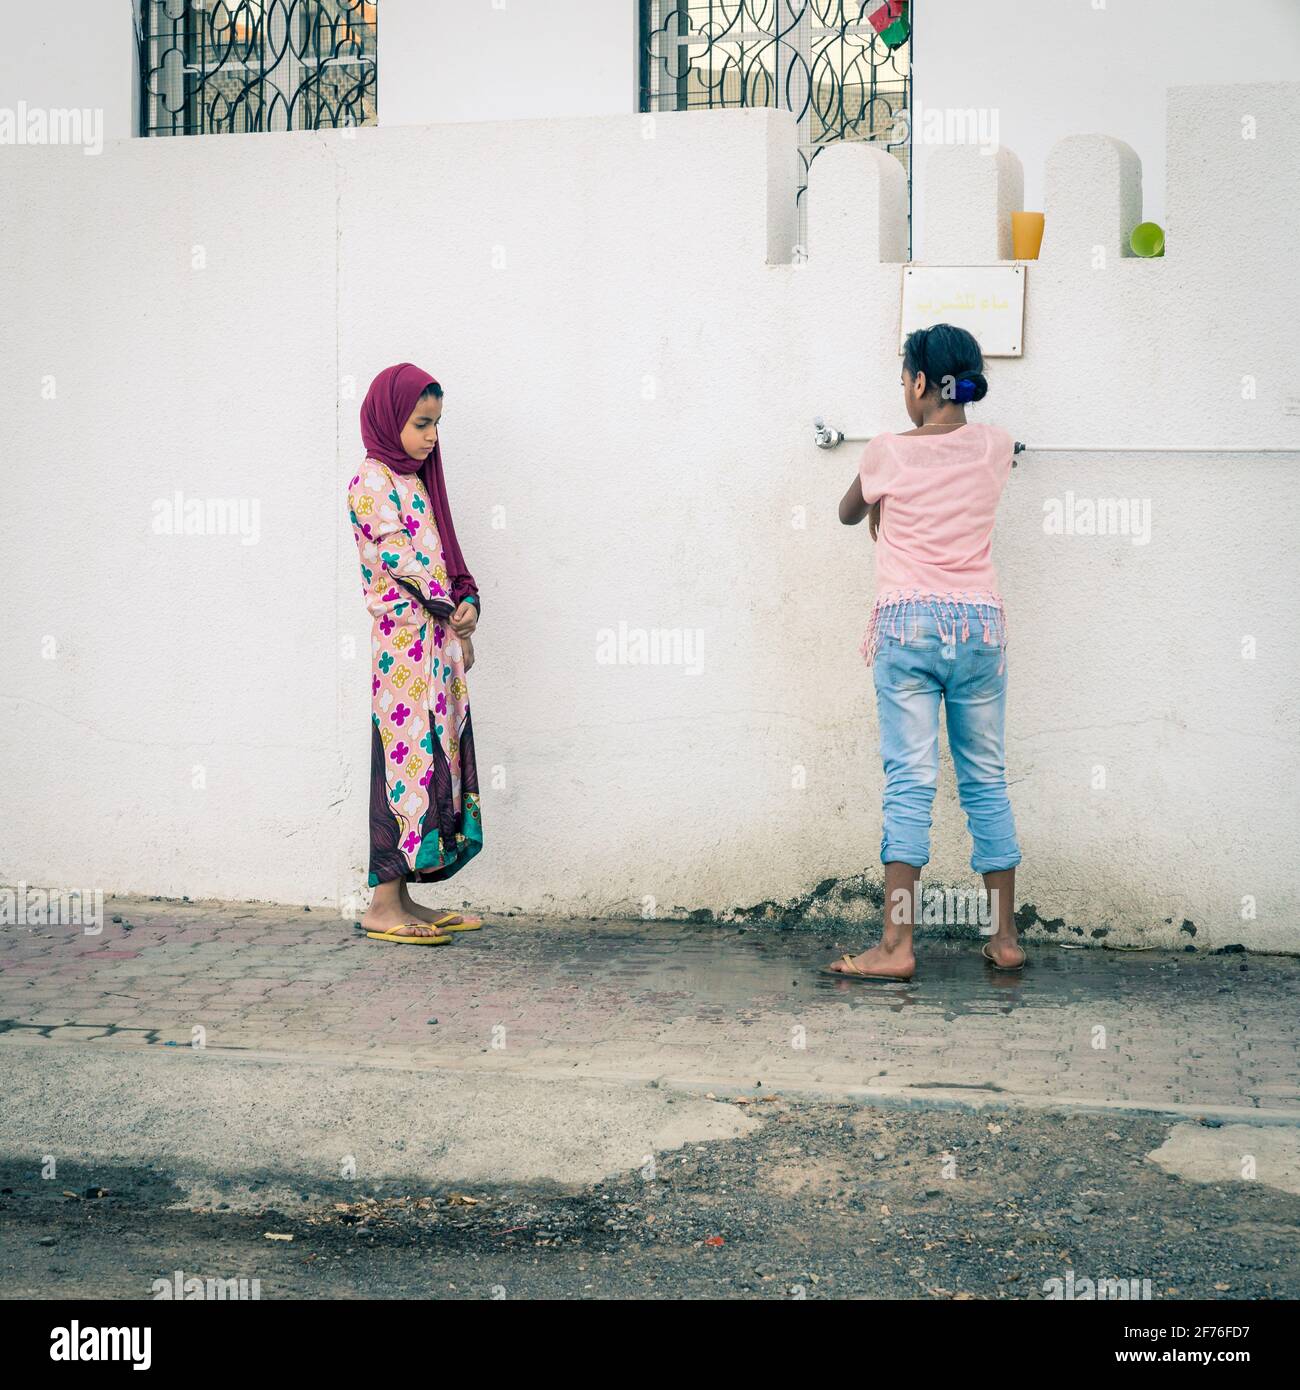 Muscat, Oman, December 3, 2016: Two girls by a water spigot outside of a mosque in the old town in Muscat, Oman Stock Photo